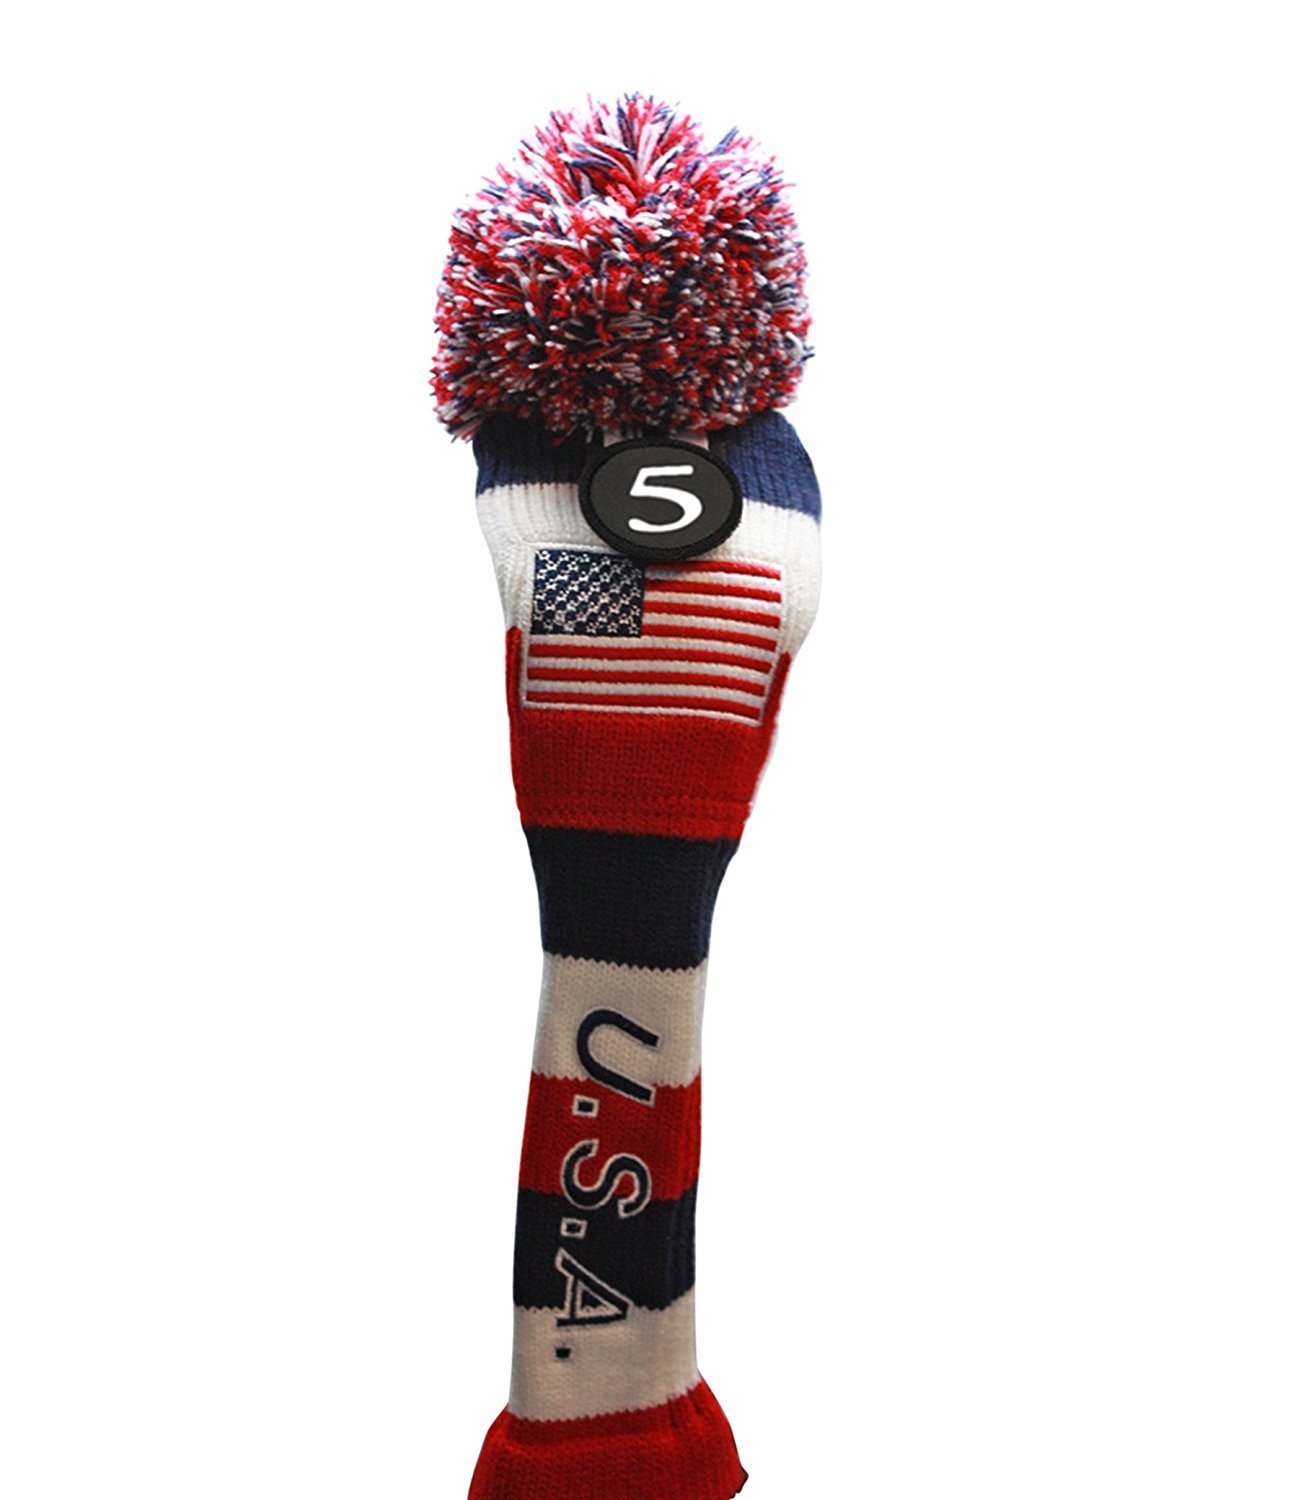 USA Majek Golf Driver 1 3 5 7 9 Fairway Woods Headcovers Pom Pom Knit Limited Edition Vintage Classic Traditional Flag Stars Red White Blue Stripes Retro Head Cover Fits 460cc Drivers and 260cc Woods - image 4 of 9